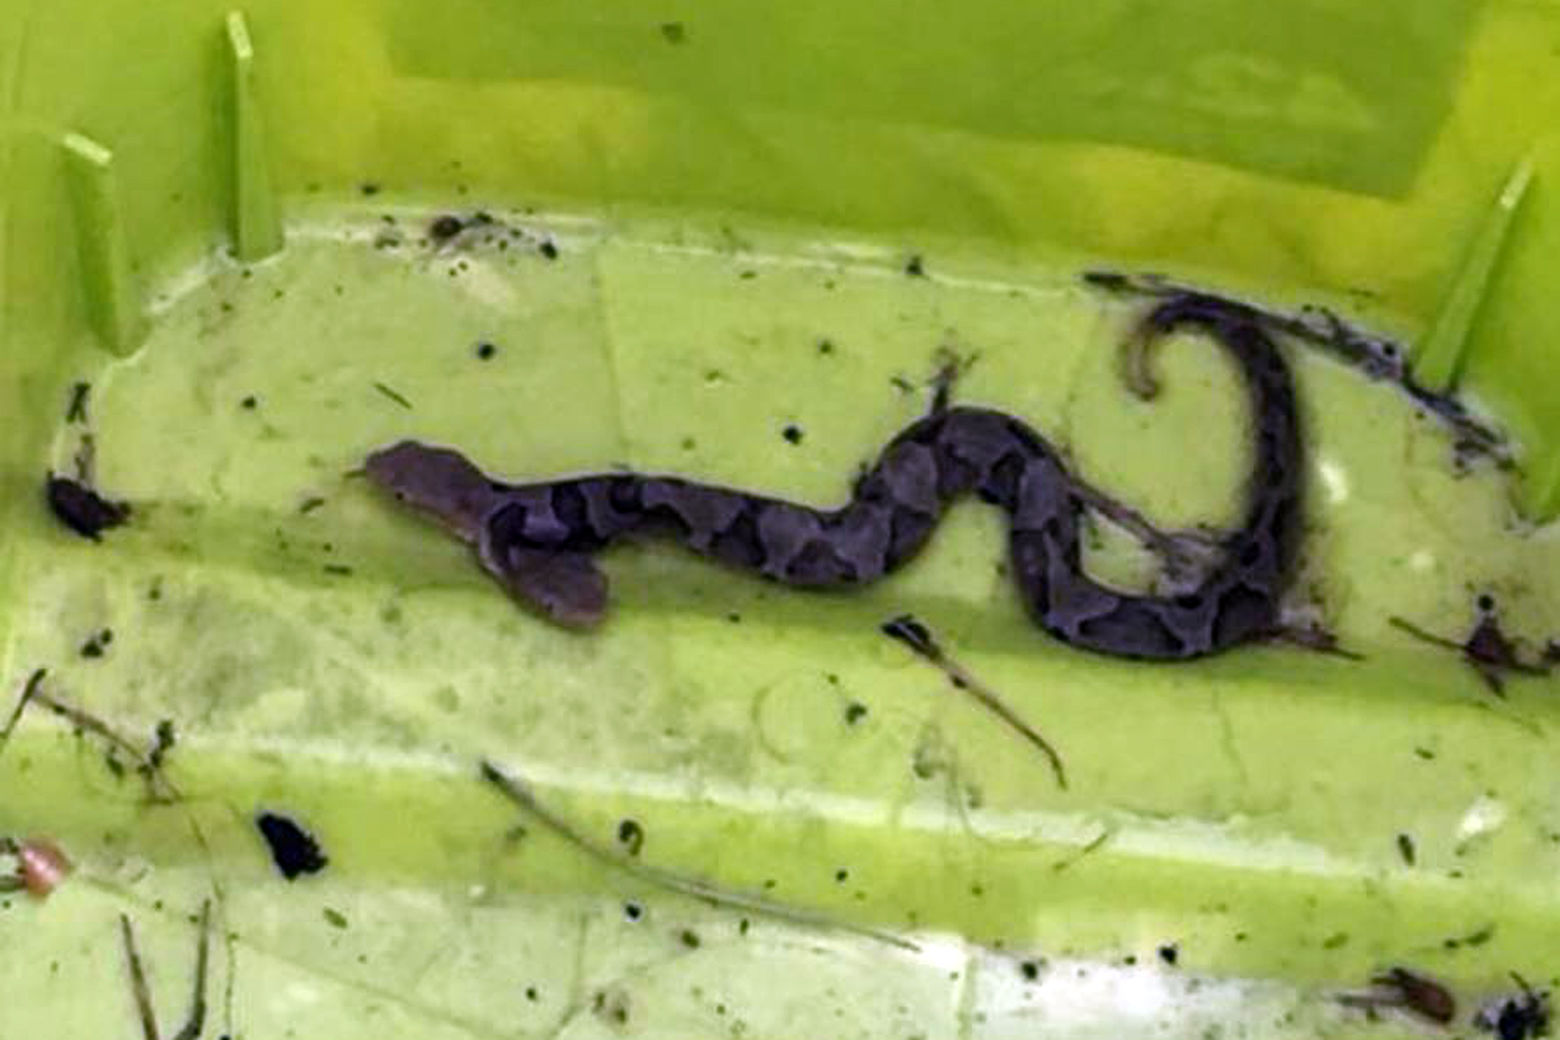 Virginia Wildlife Management and Control found an honest-to-goodness two-headed snake in Woodbridge, Virginia. (Courtesy Virginia Wildlife Management and Control)